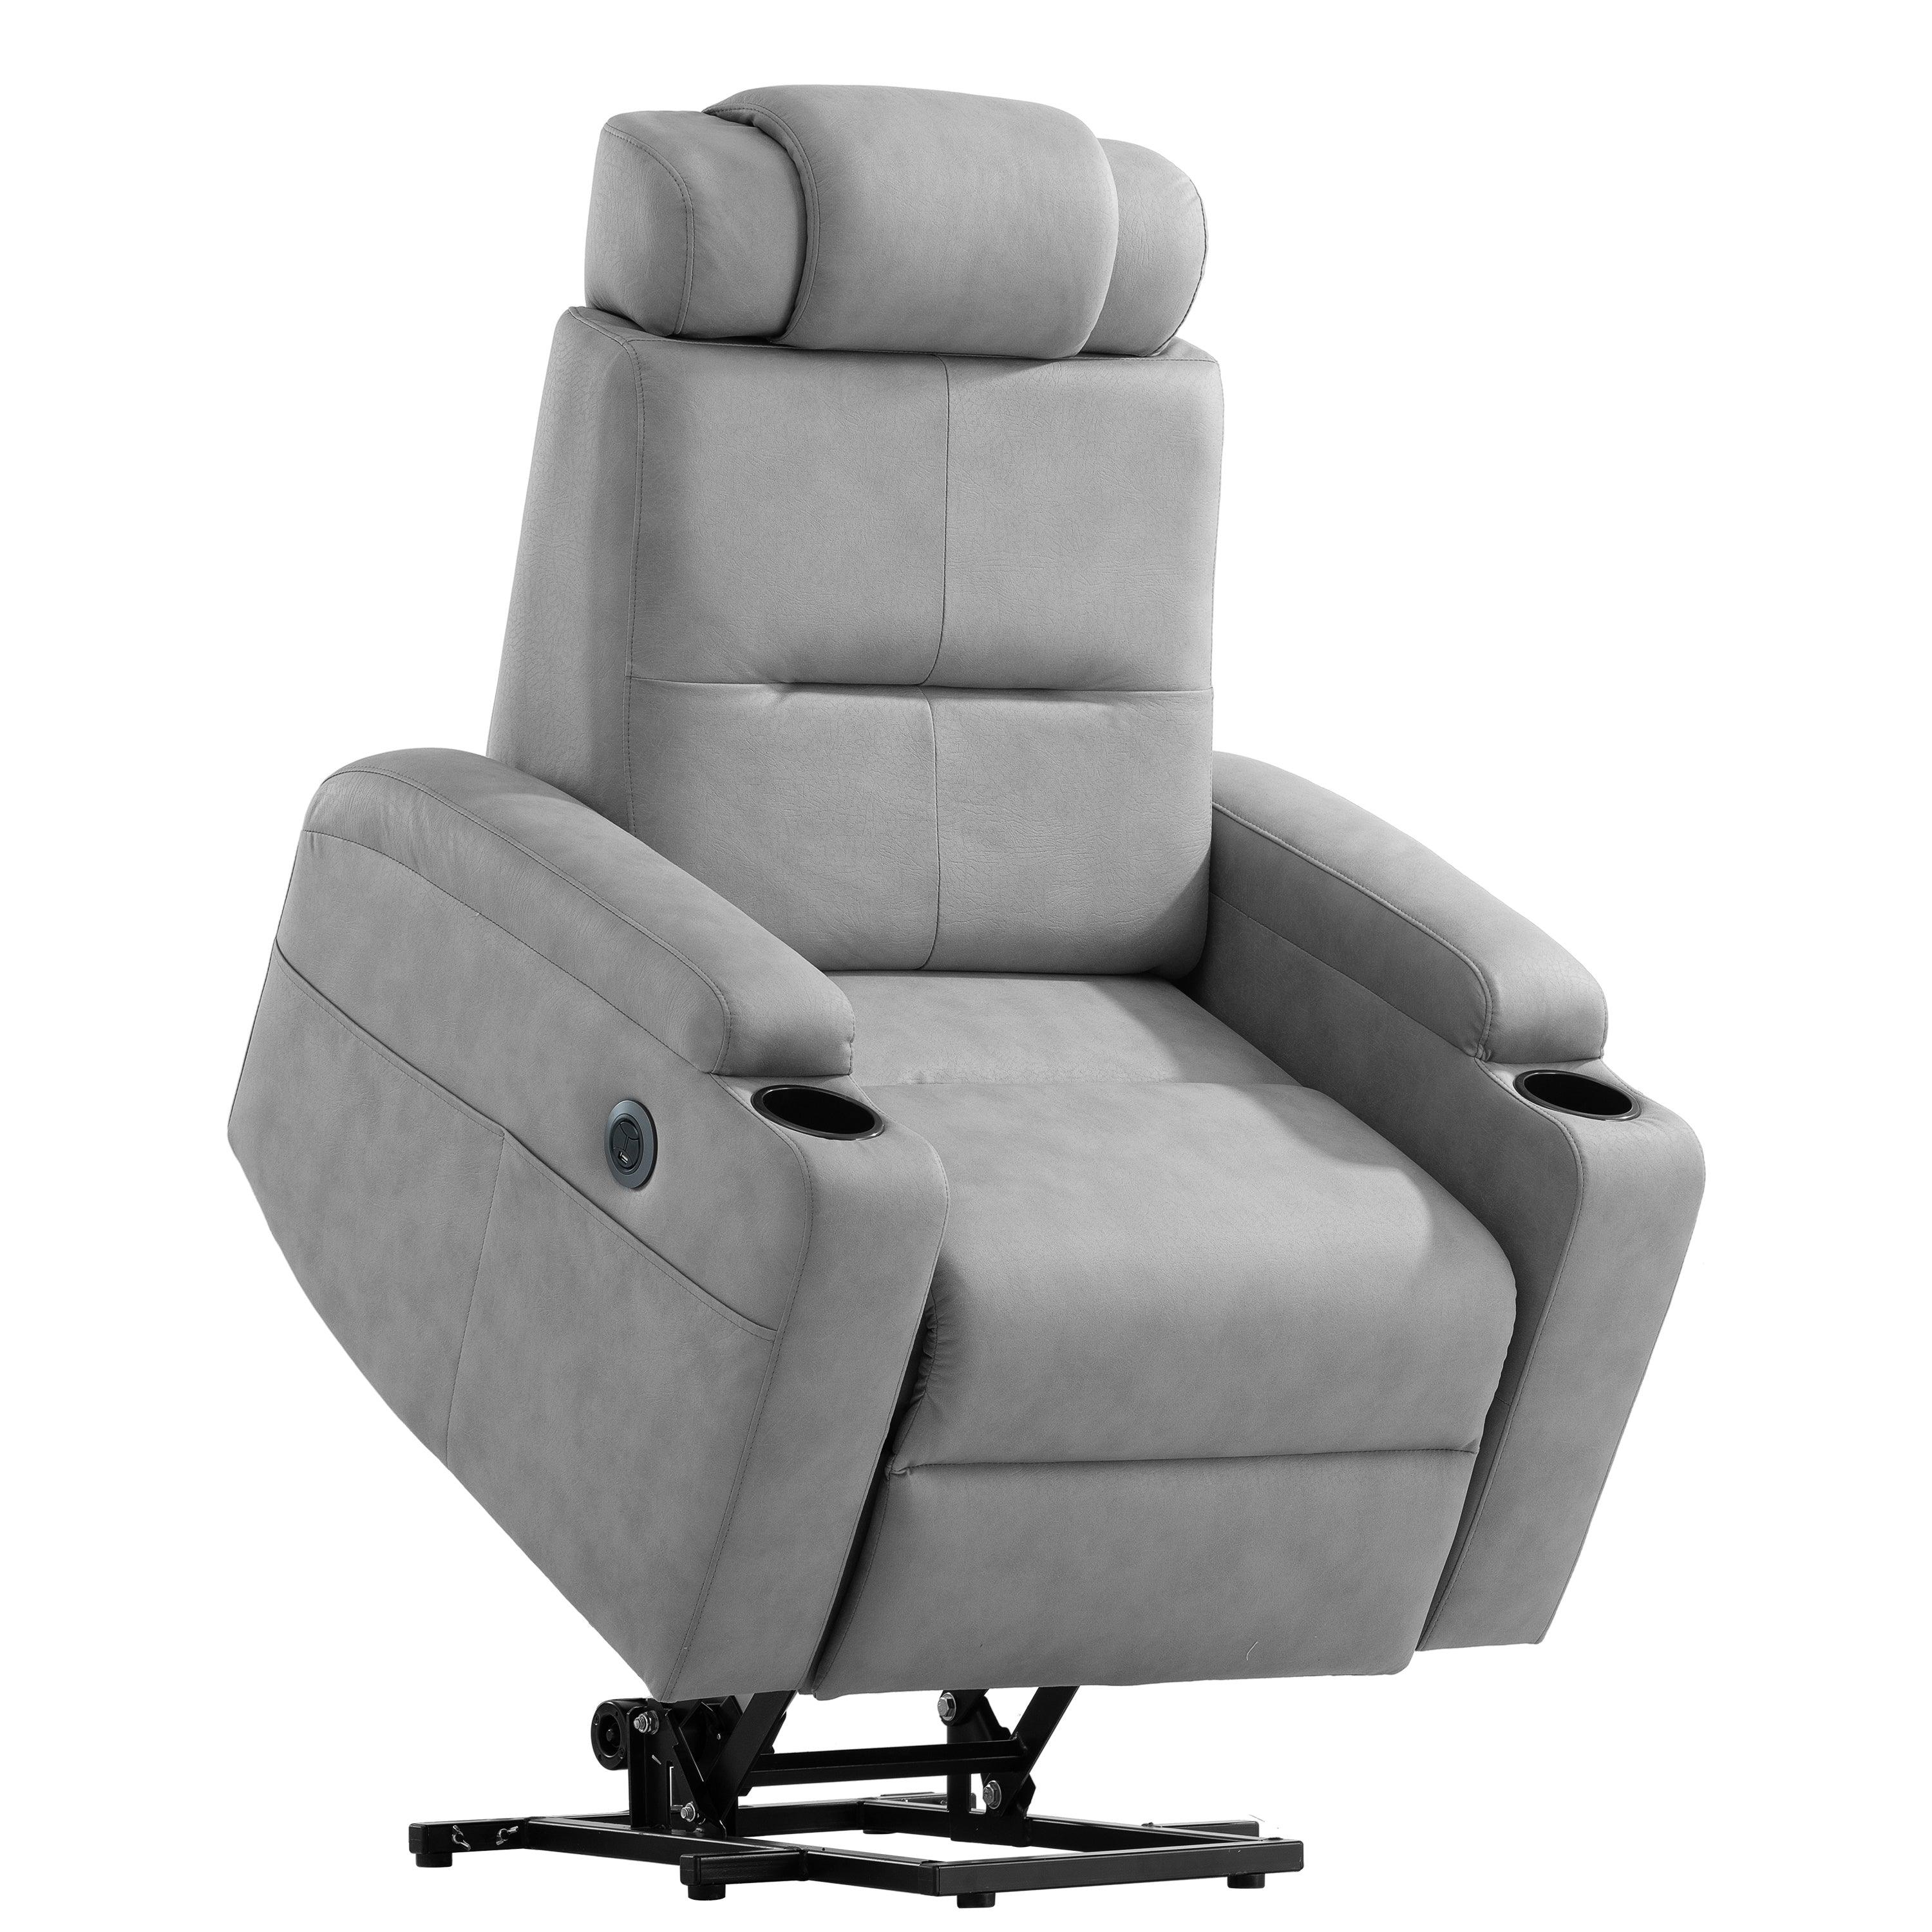 Modern Power Lift Chair Recliner, lifted angle